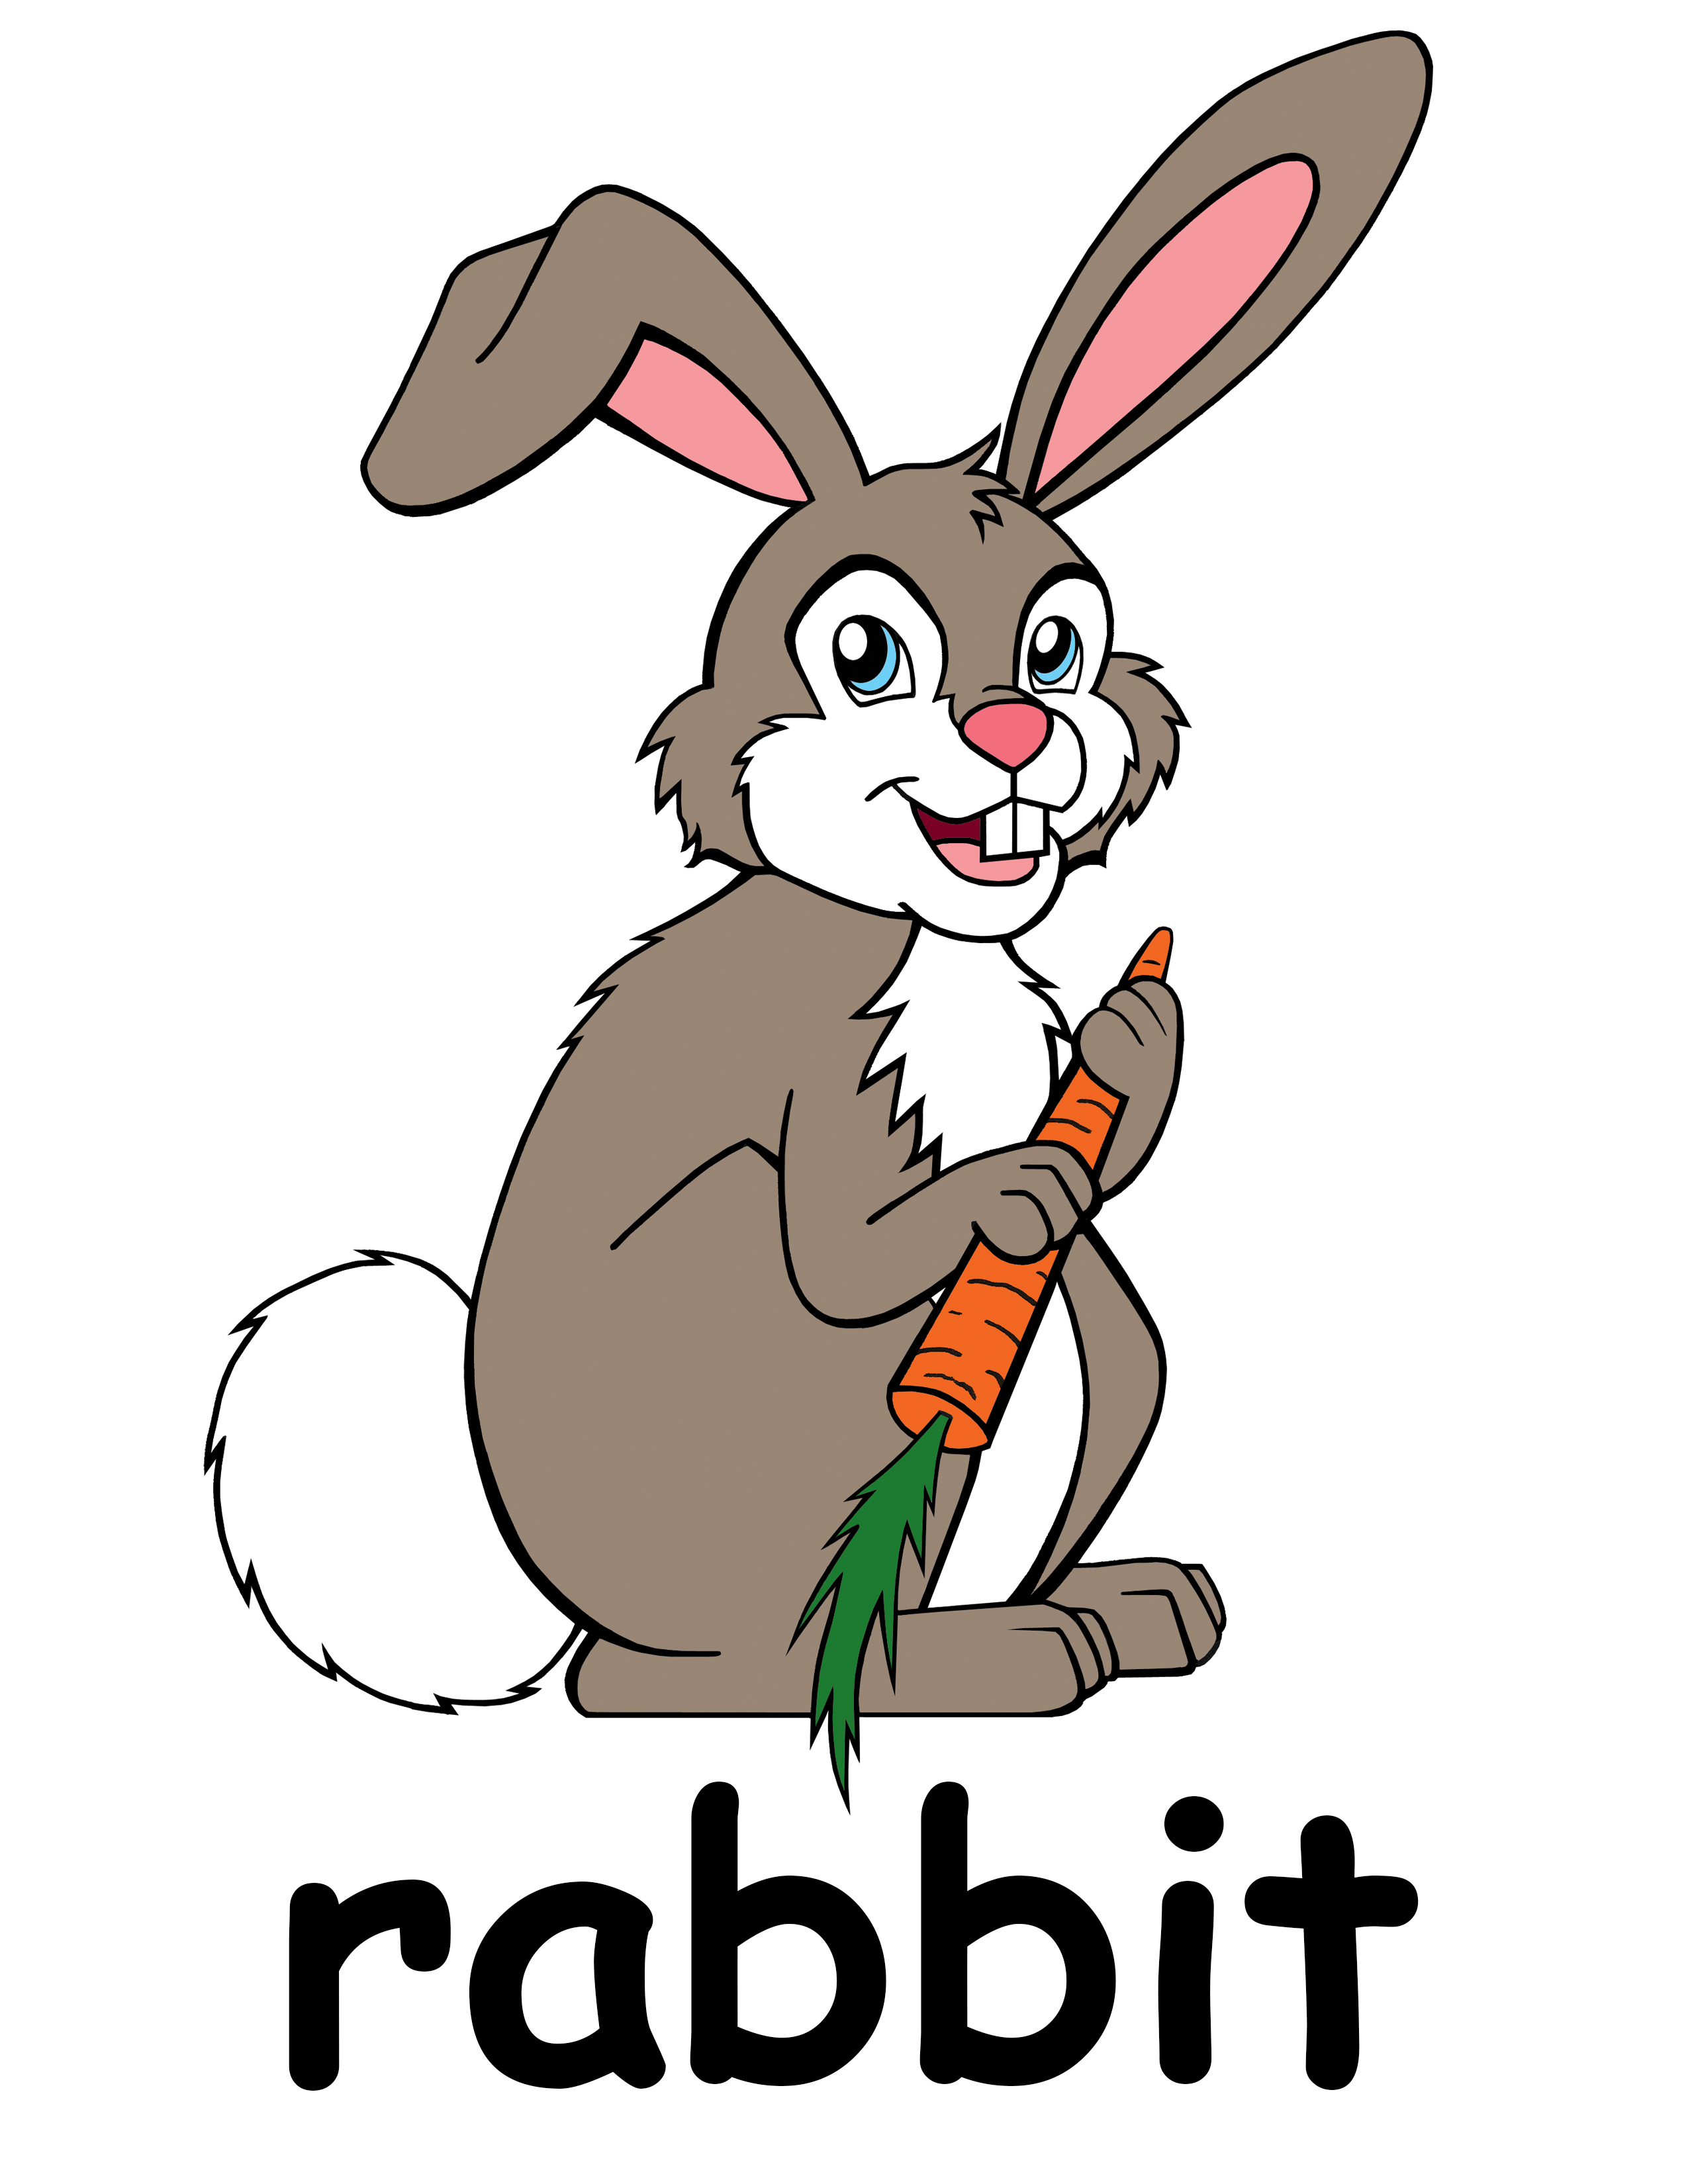 Rabbit clipart free images image 4 2.